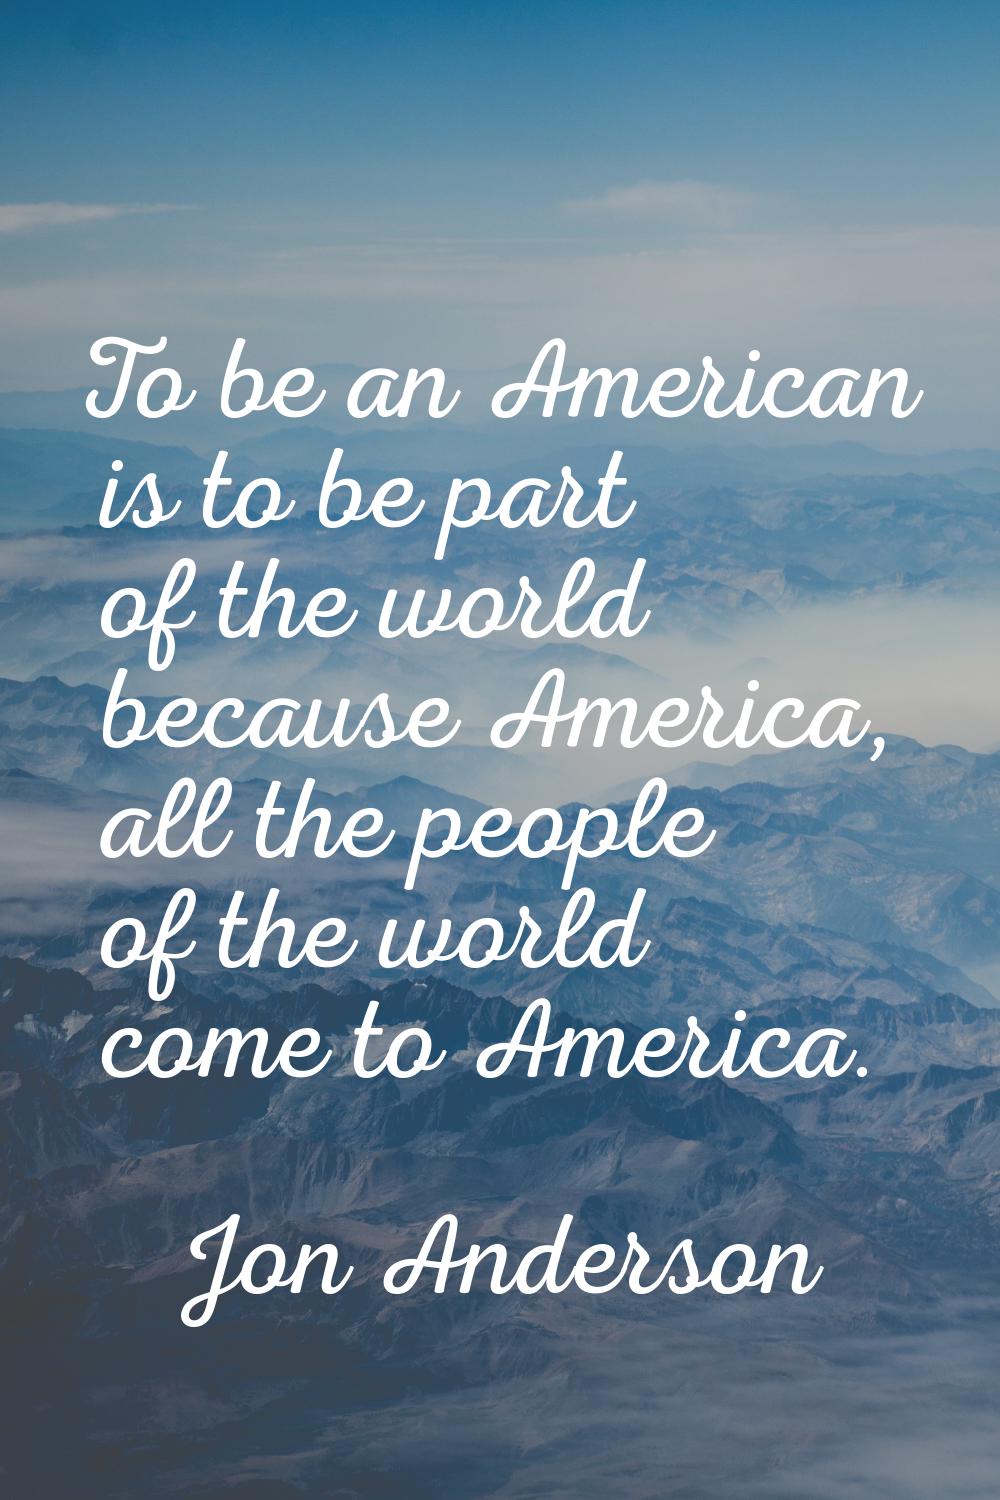 To be an American is to be part of the world because America, all the people of the world come to A